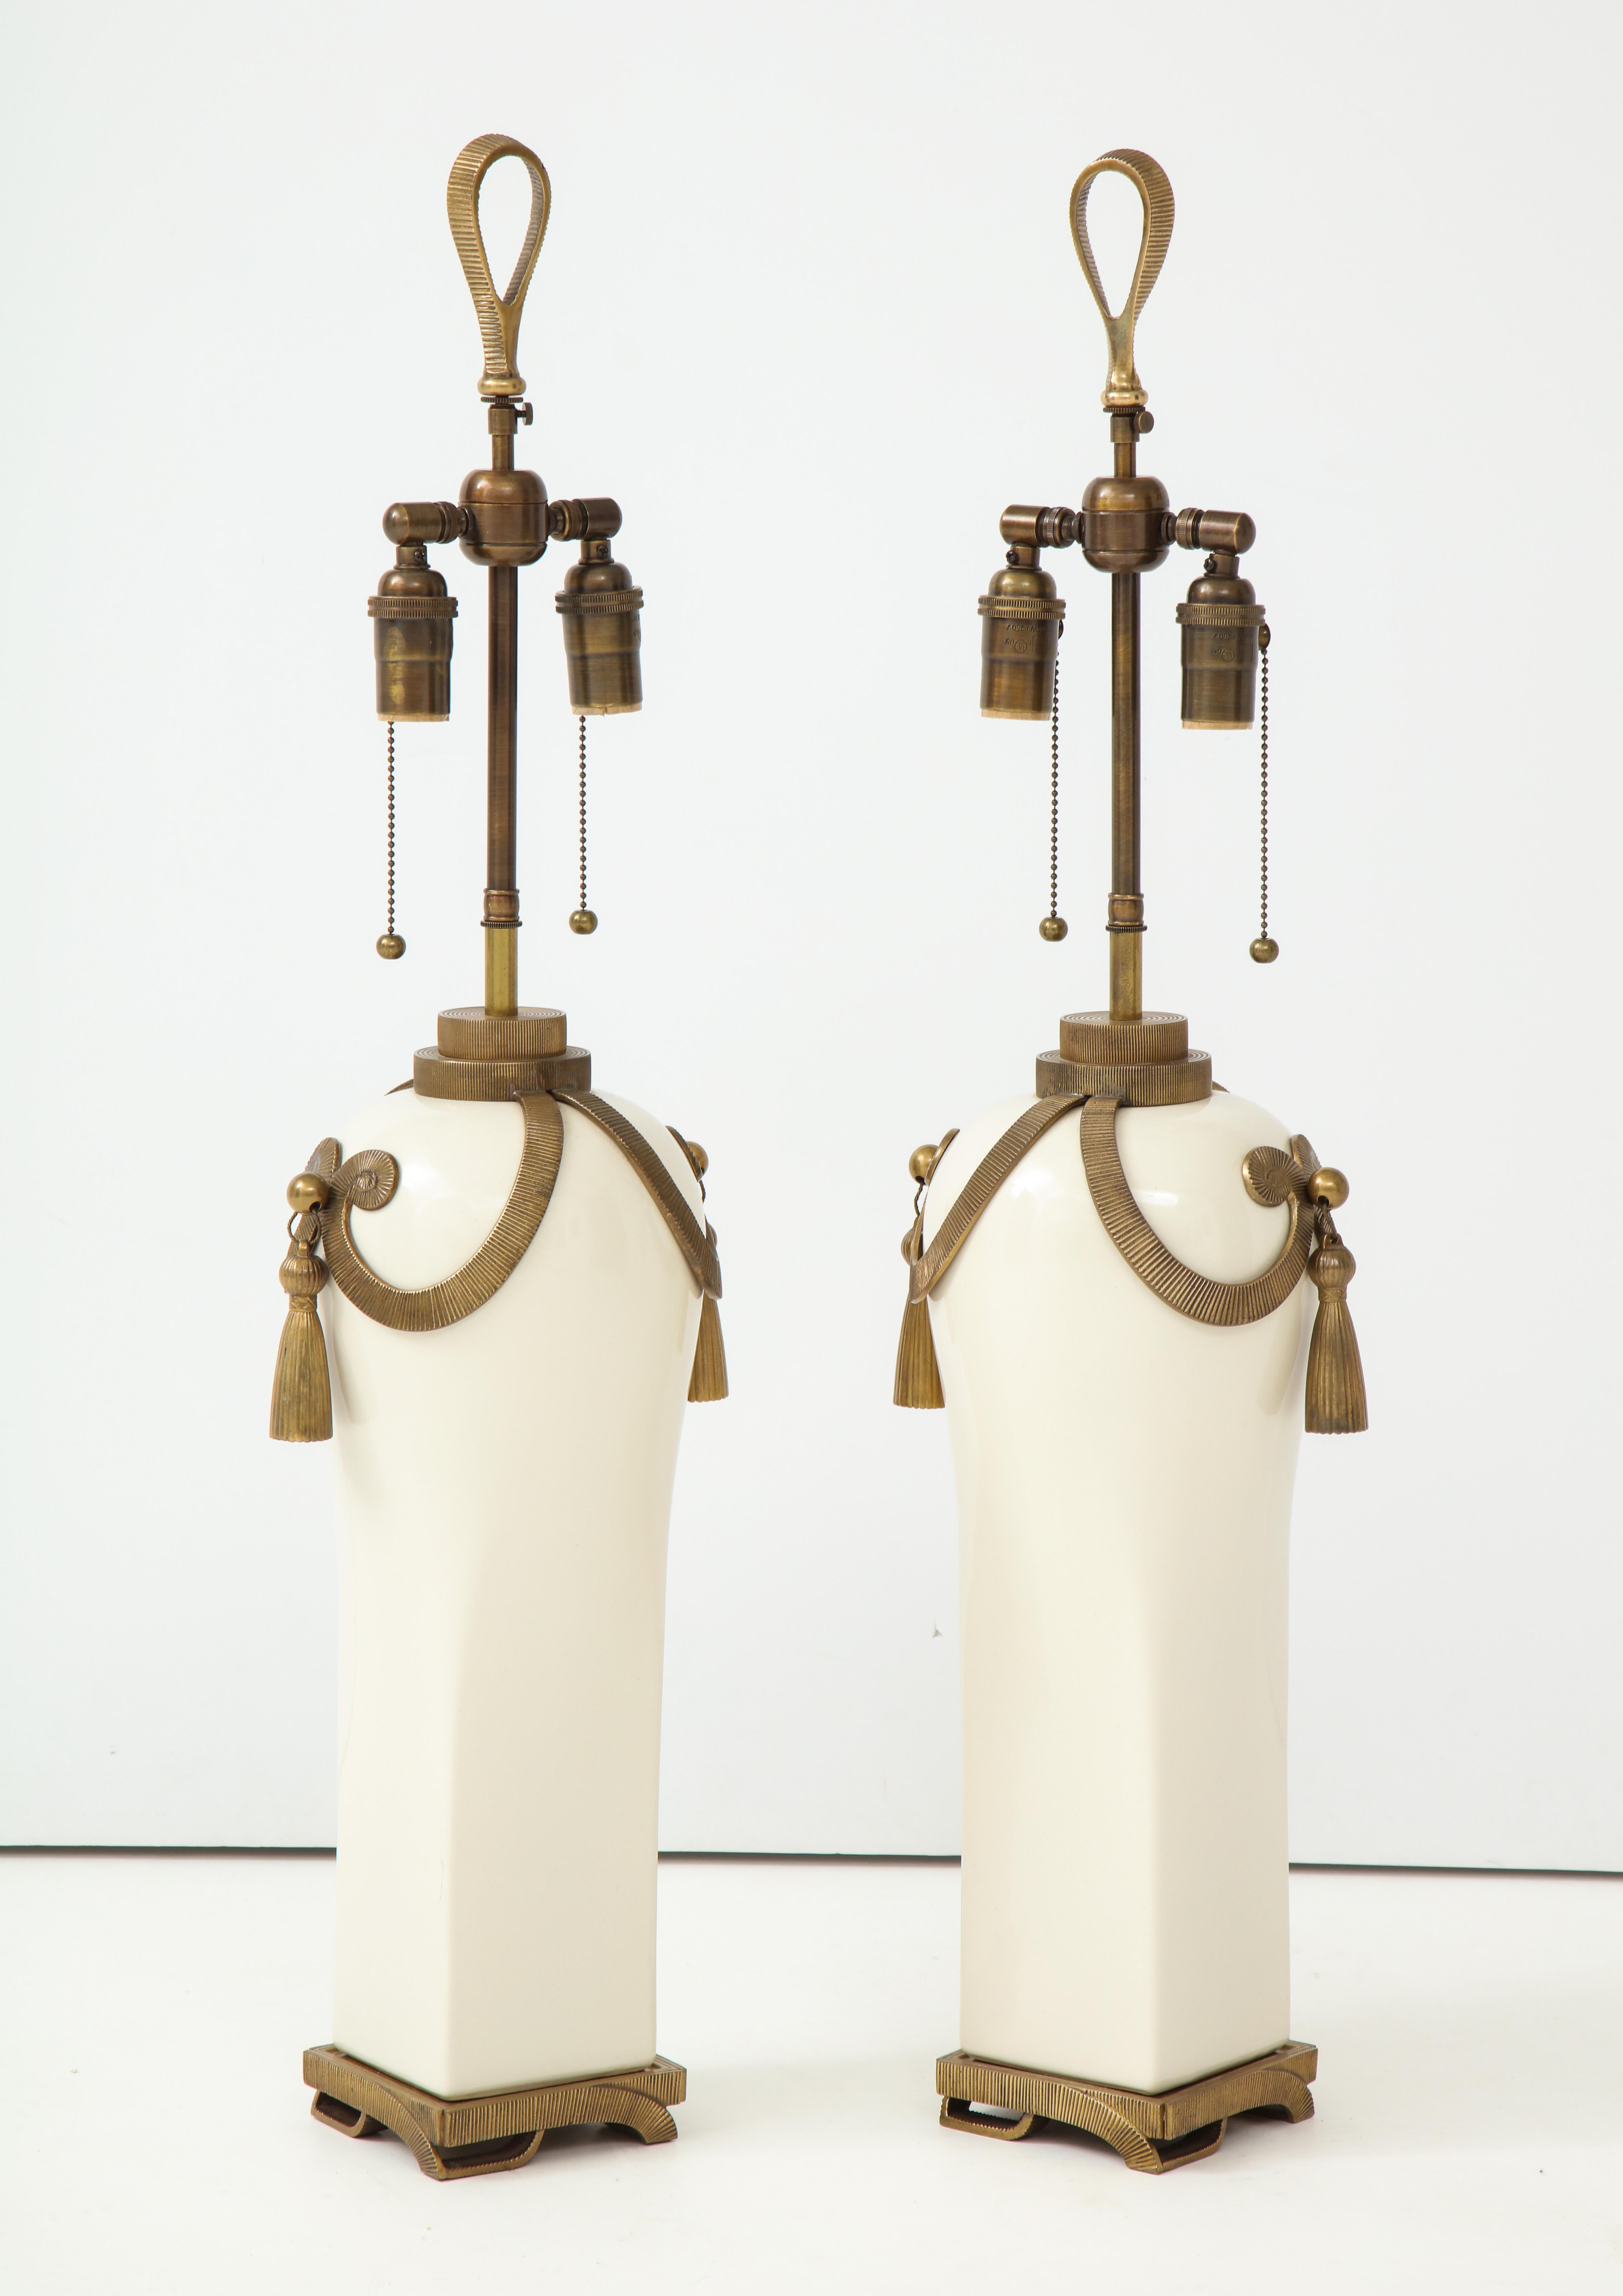 Pair of large ceramic lamps elaborately decorated with brass fittings
in the Art Deco style by Chapman.
The Ivory glazed ceramic lamps are decorated with a grooved brass patterned trim which is followed throughout with matching heavy tassels that